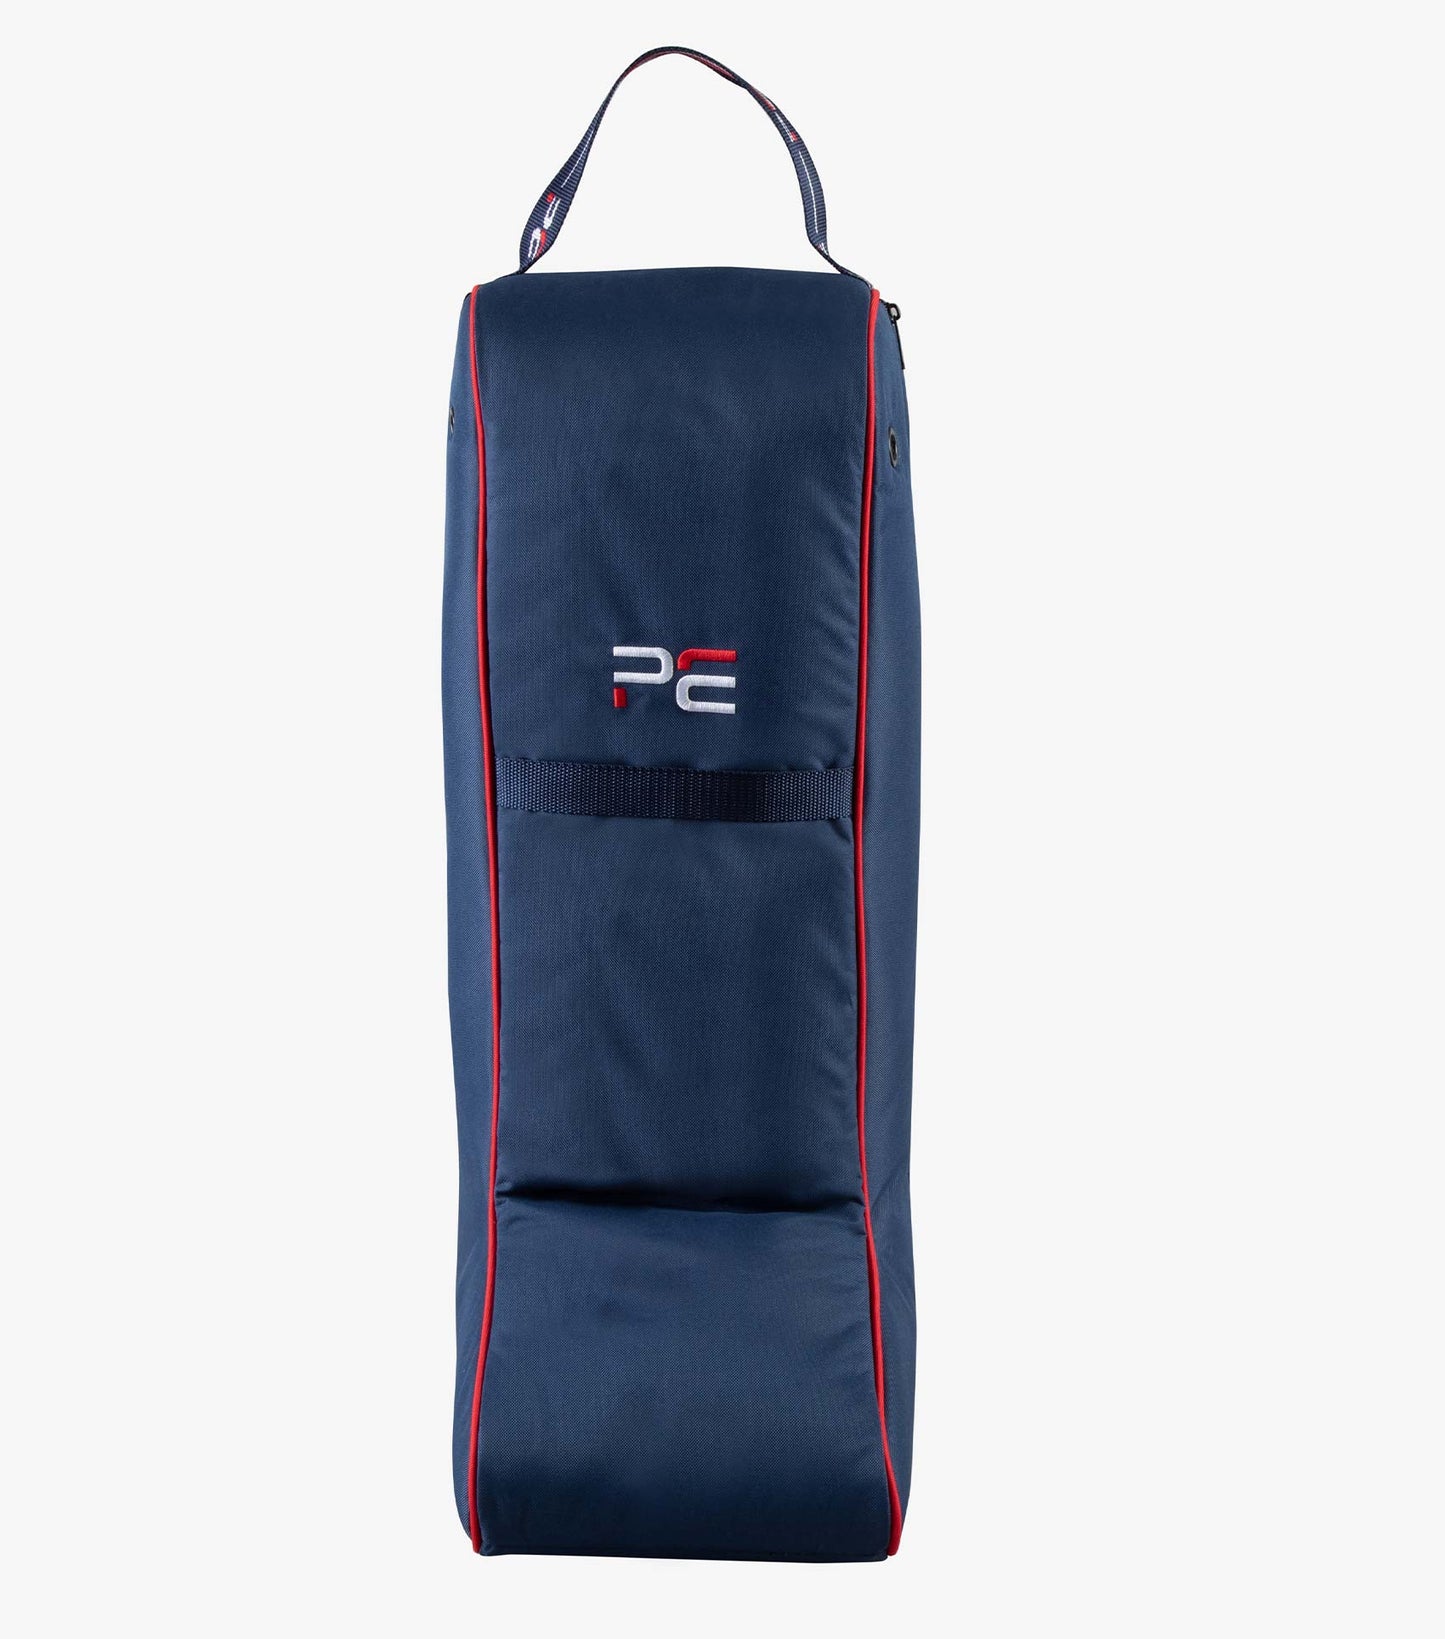 Premier Equine Tall Boot Bag